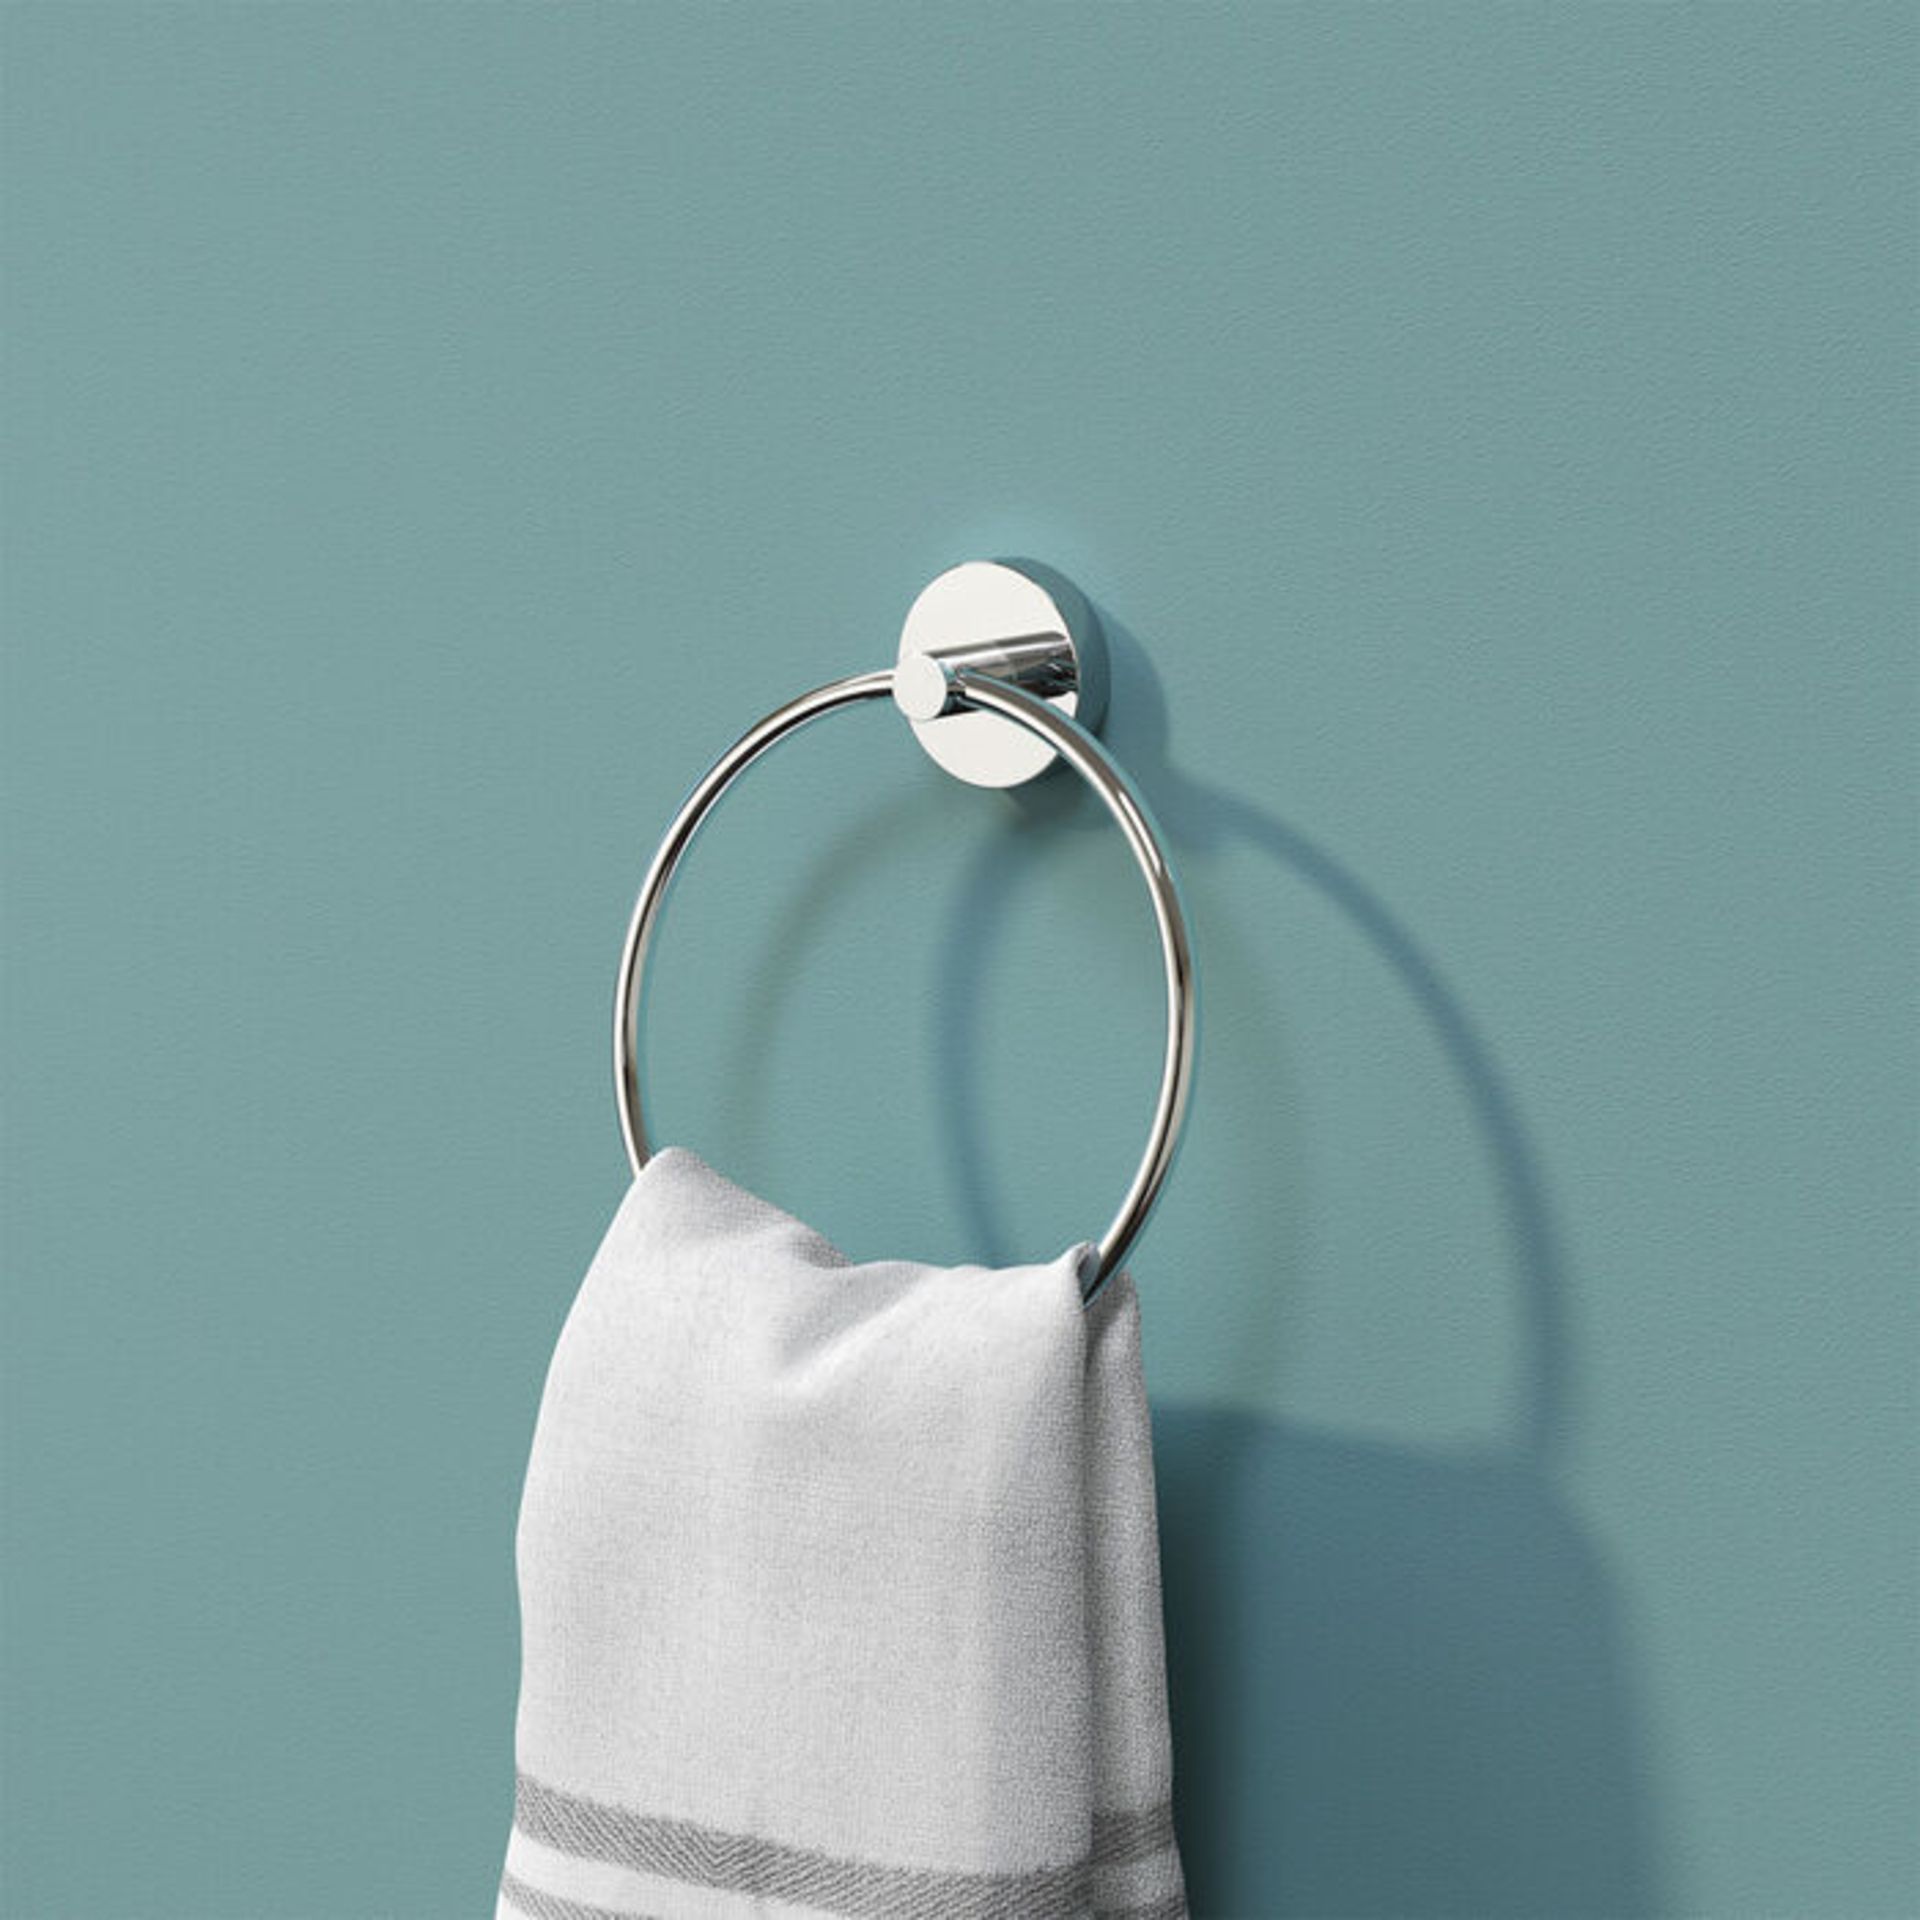 (YU1015) Finsbury Towel Ring. Simple yet stylish Completes your bathroom with a little extra ... - Image 2 of 3